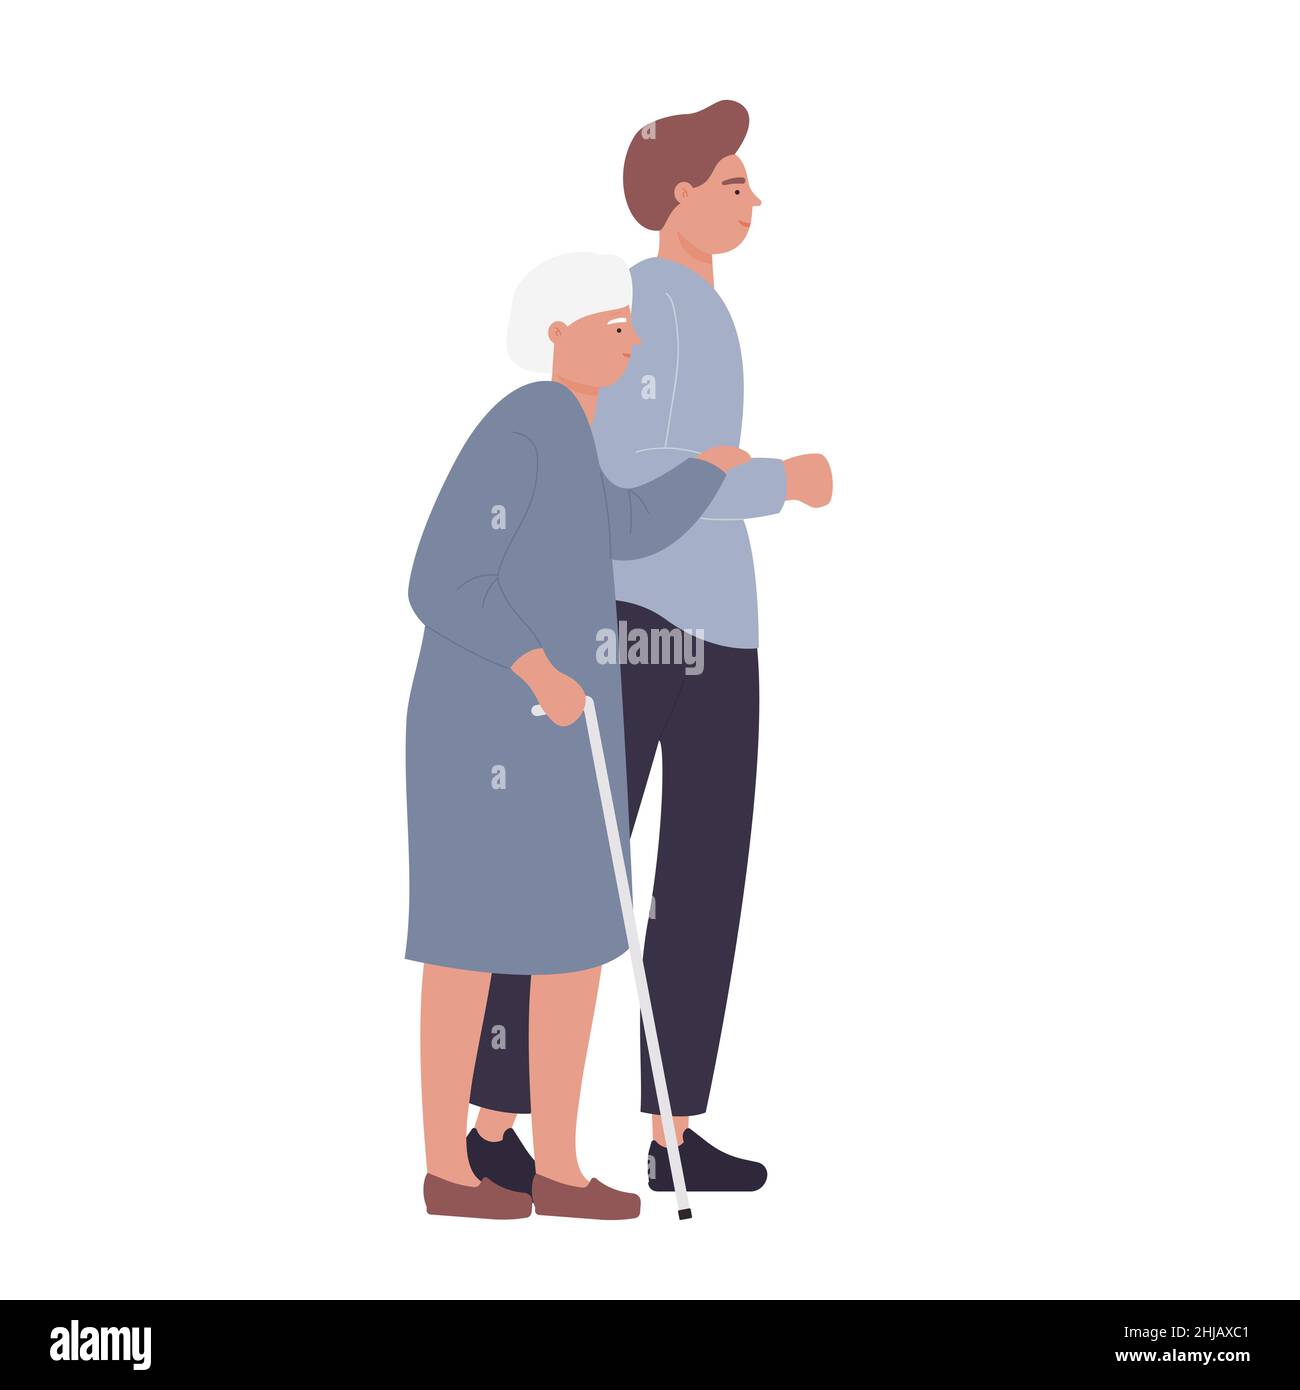 Free Images : old woman, silhouette, senior, walking cane, standing, full  length, aging, support, supported, care, grandmother, design, elder,  grandparents, arm, human body, sleeve, gesture, elbow, balance, human leg,  knee, font, shadow